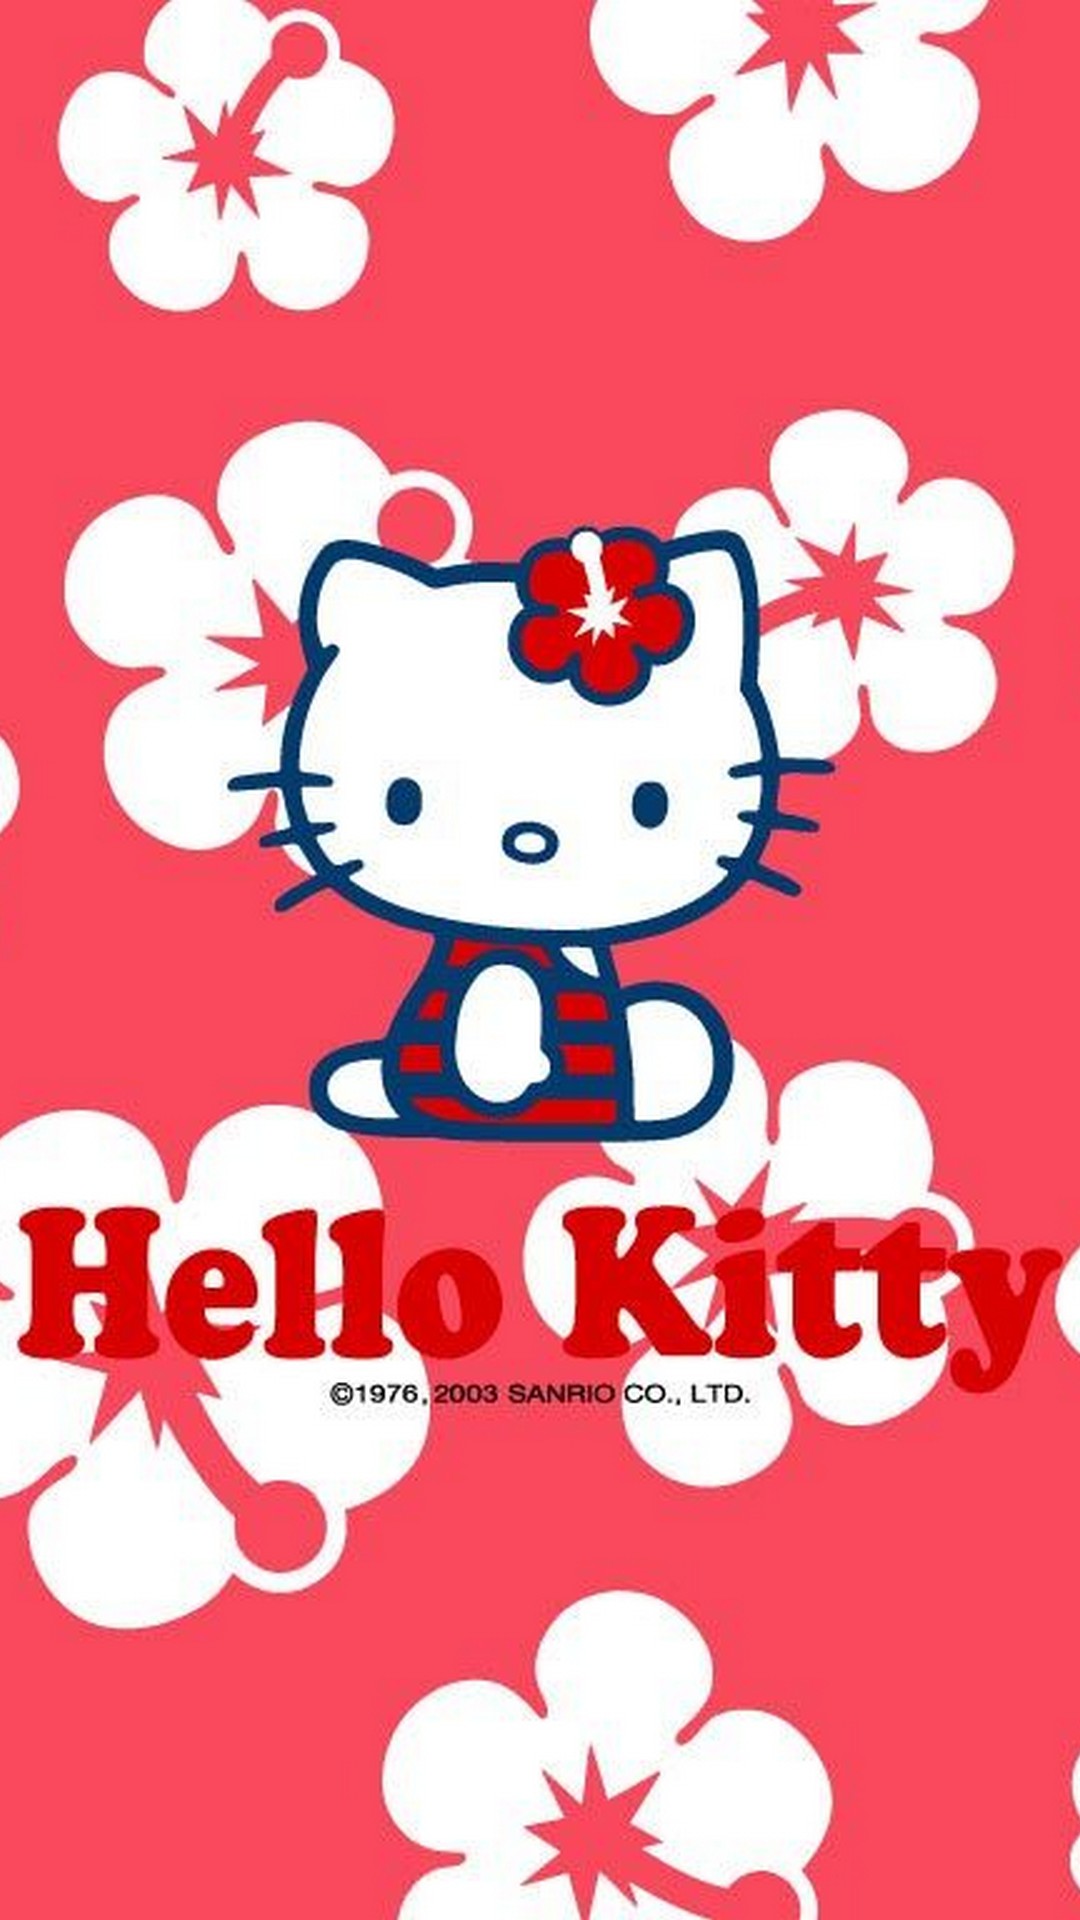 Android Wallpaper Hello Kitty with resolution 1080X1920 pixel. You can make this wallpaper for your Android backgrounds, Tablet, Smartphones Screensavers and Mobile Phone Lock Screen